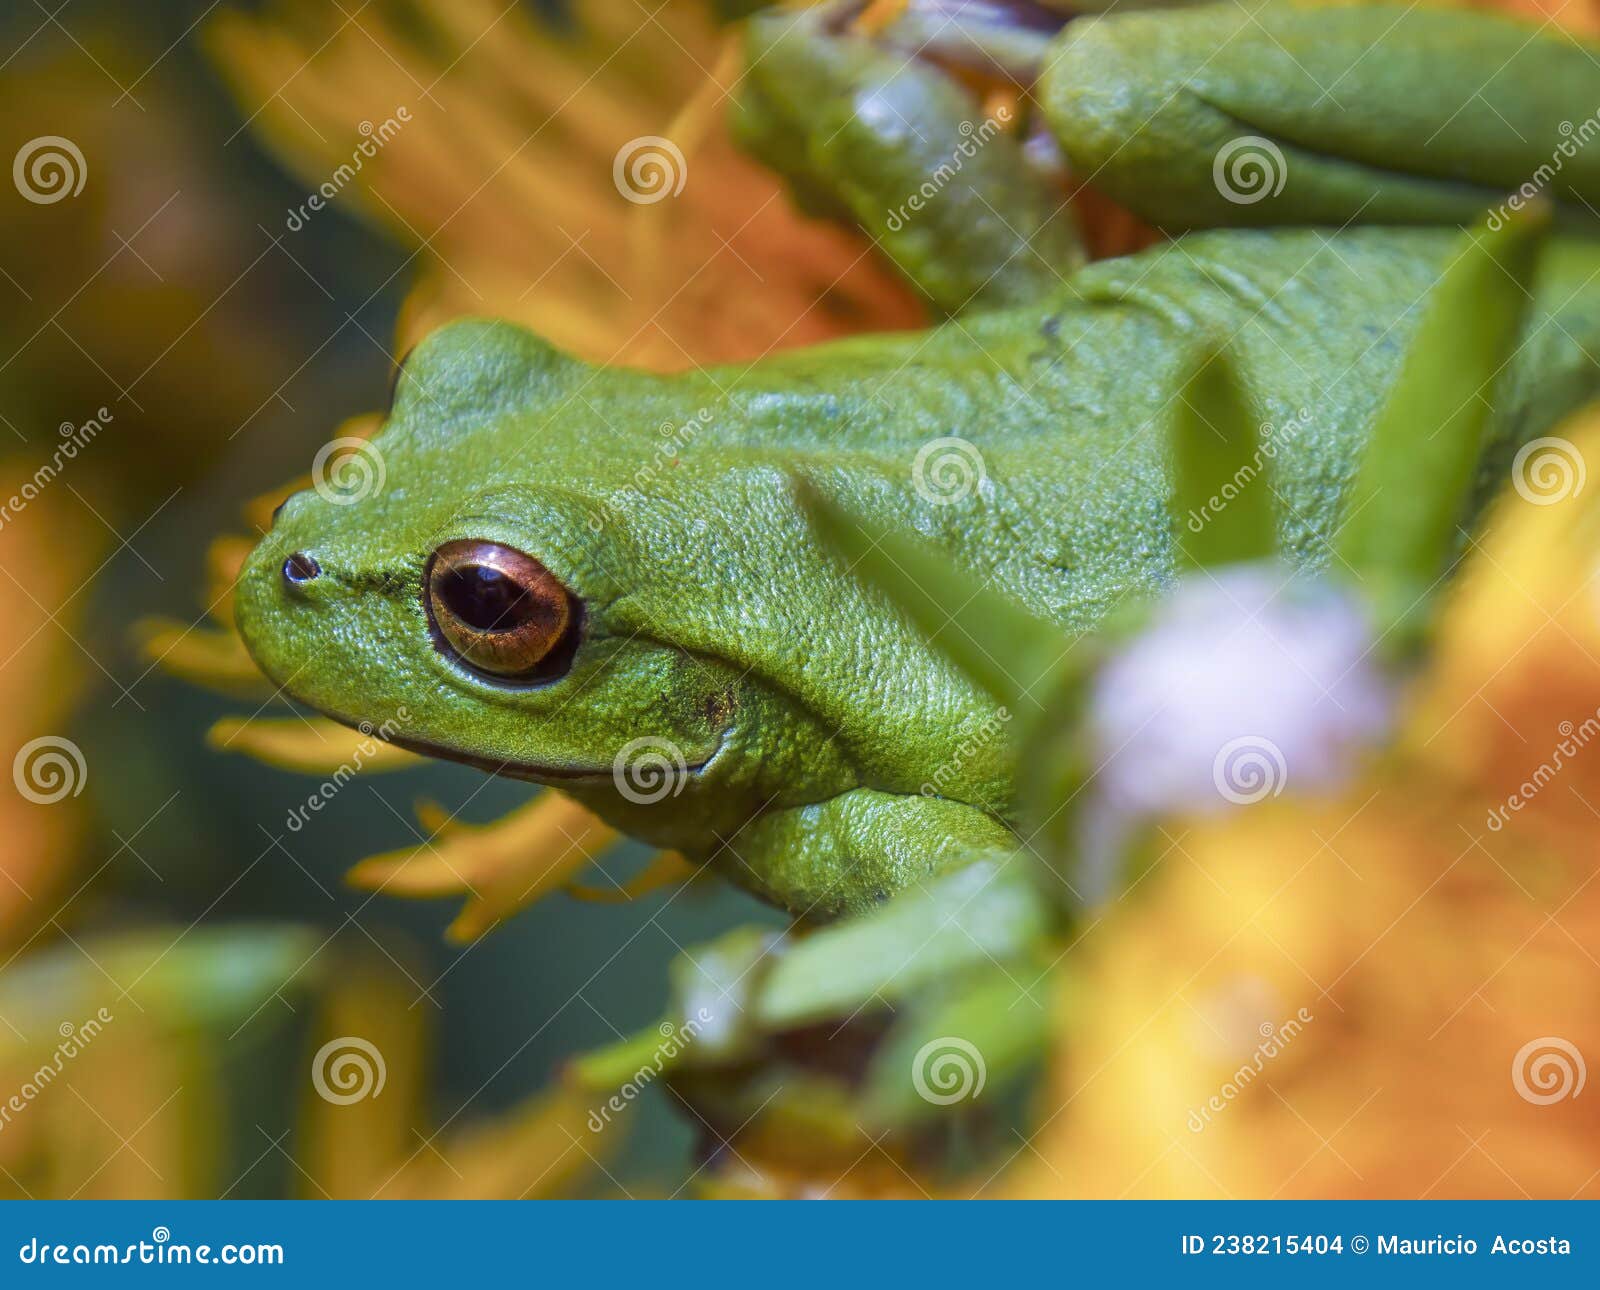 macro photography of a green dotted tree frog resting on the yellow flower 3